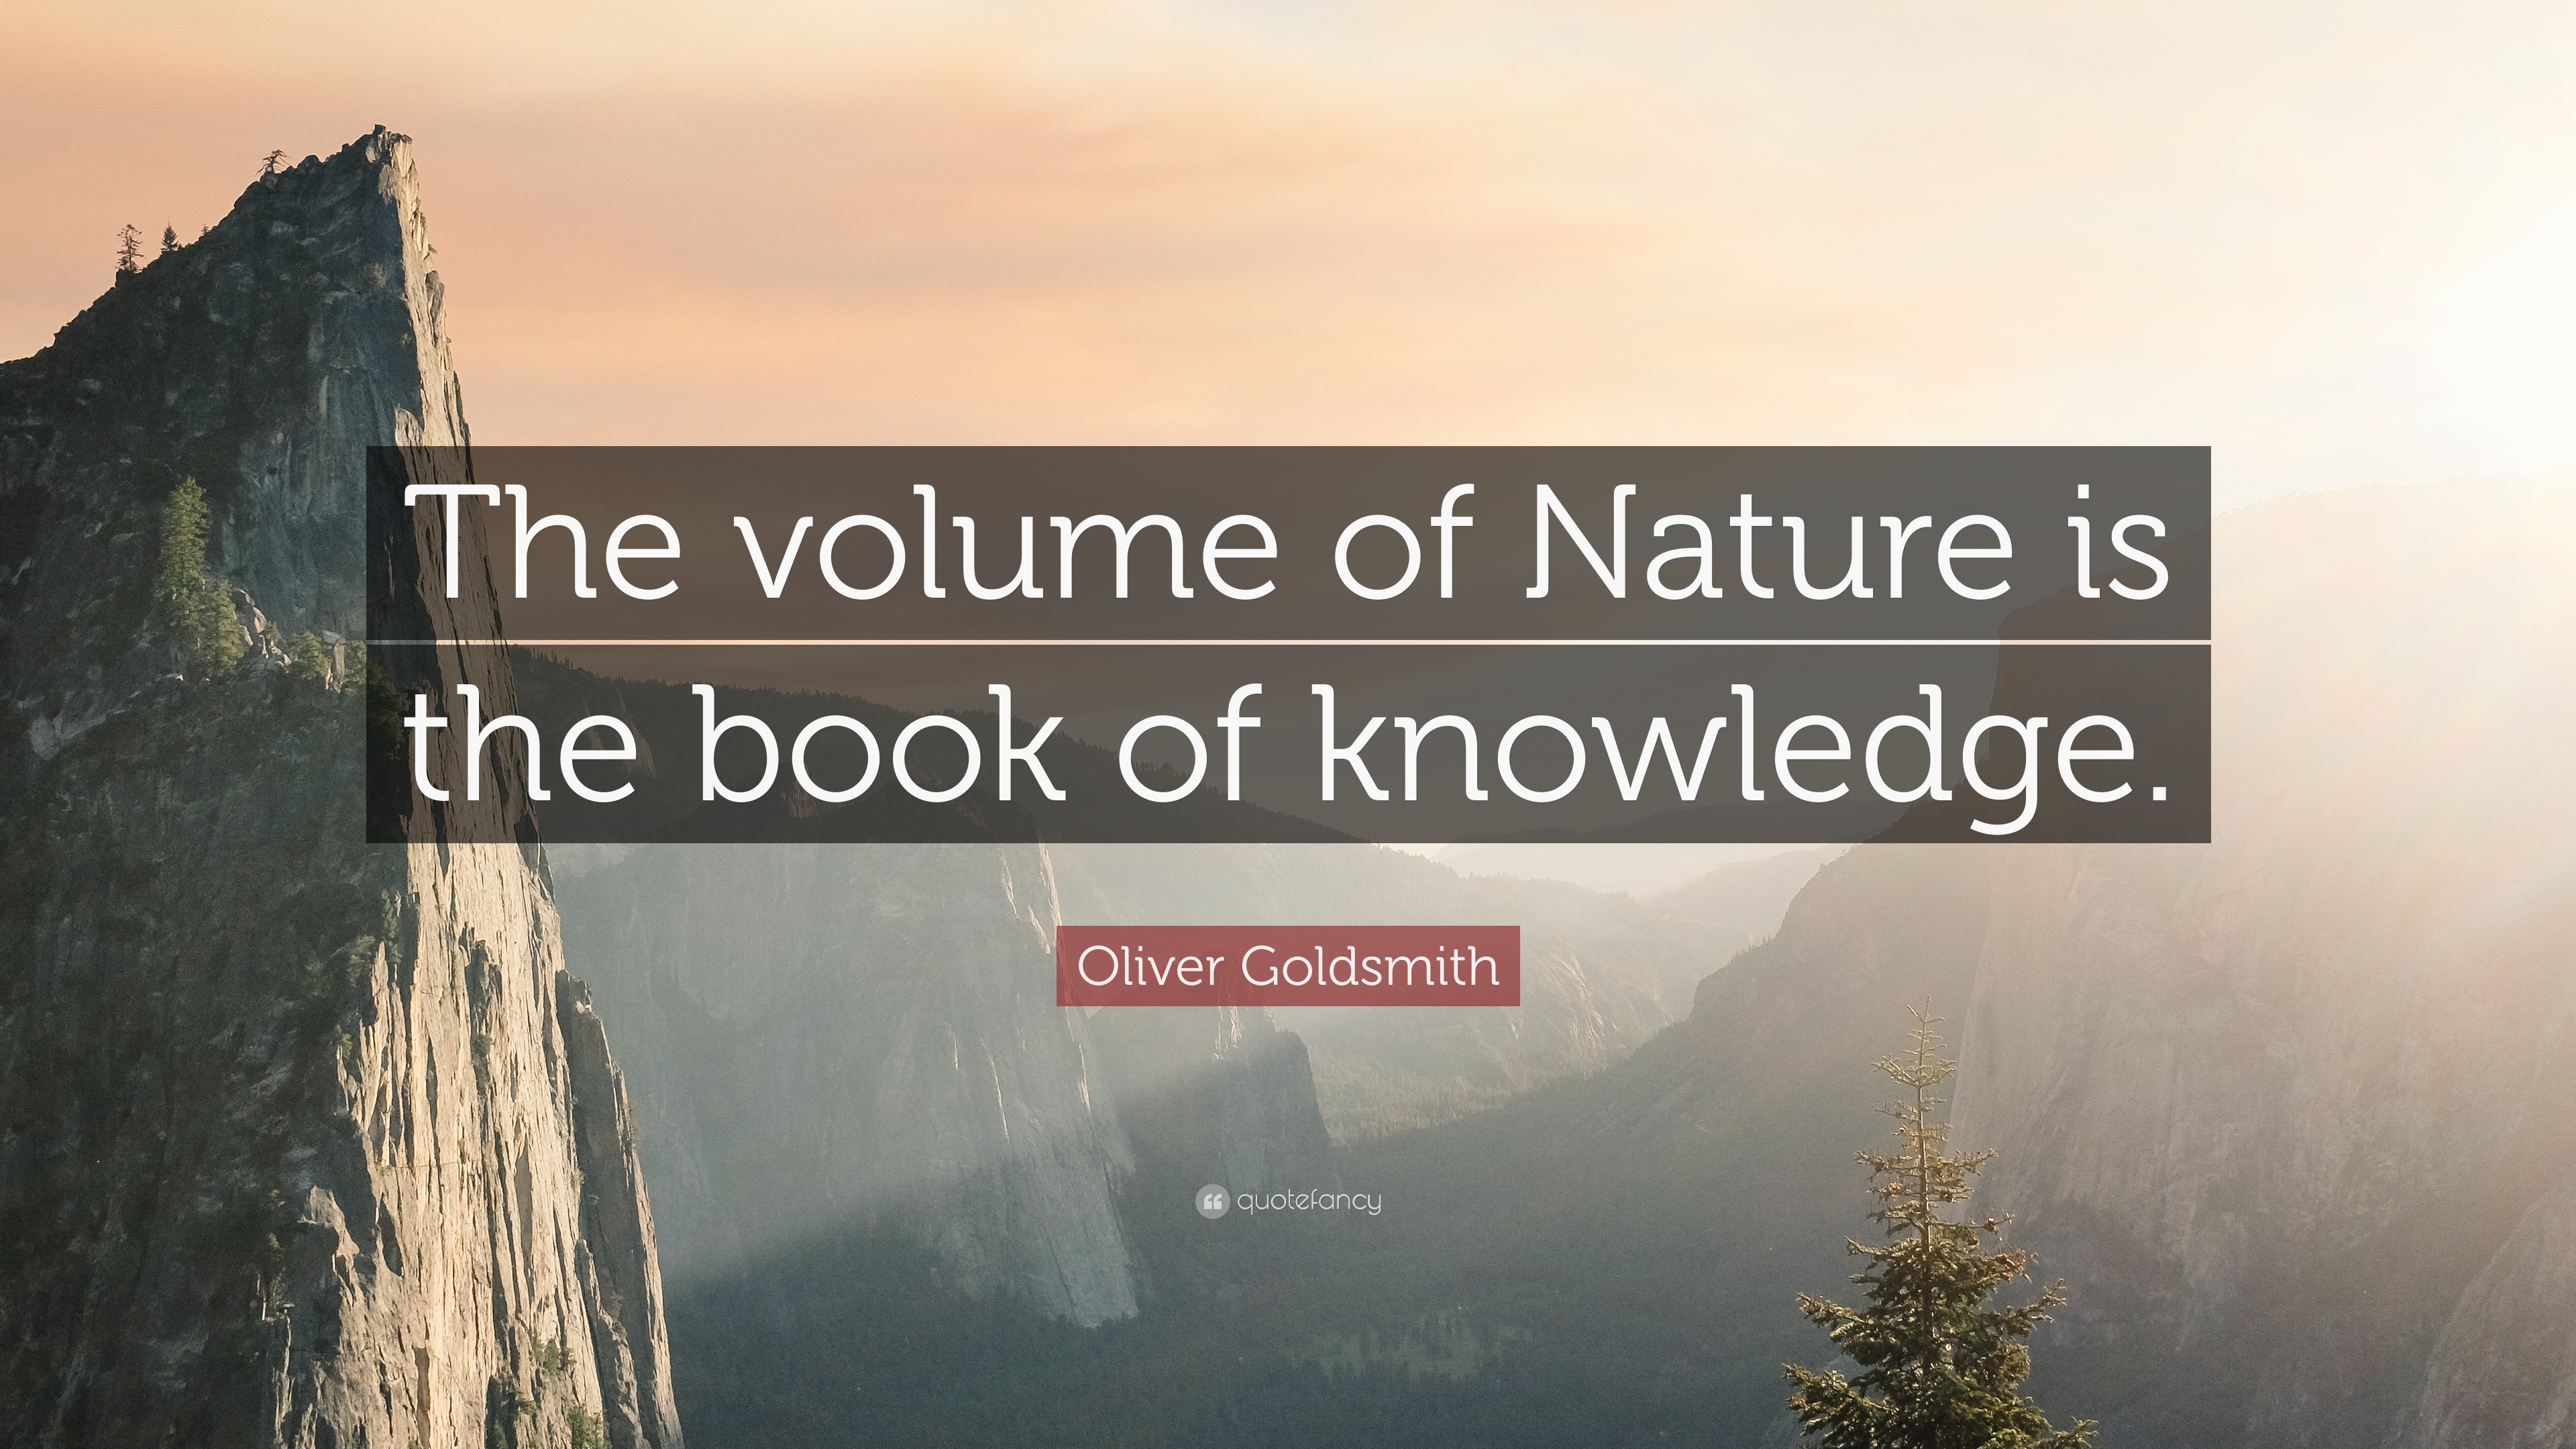 Oliver Goldsmith Quote: “The volume of Nature is the book